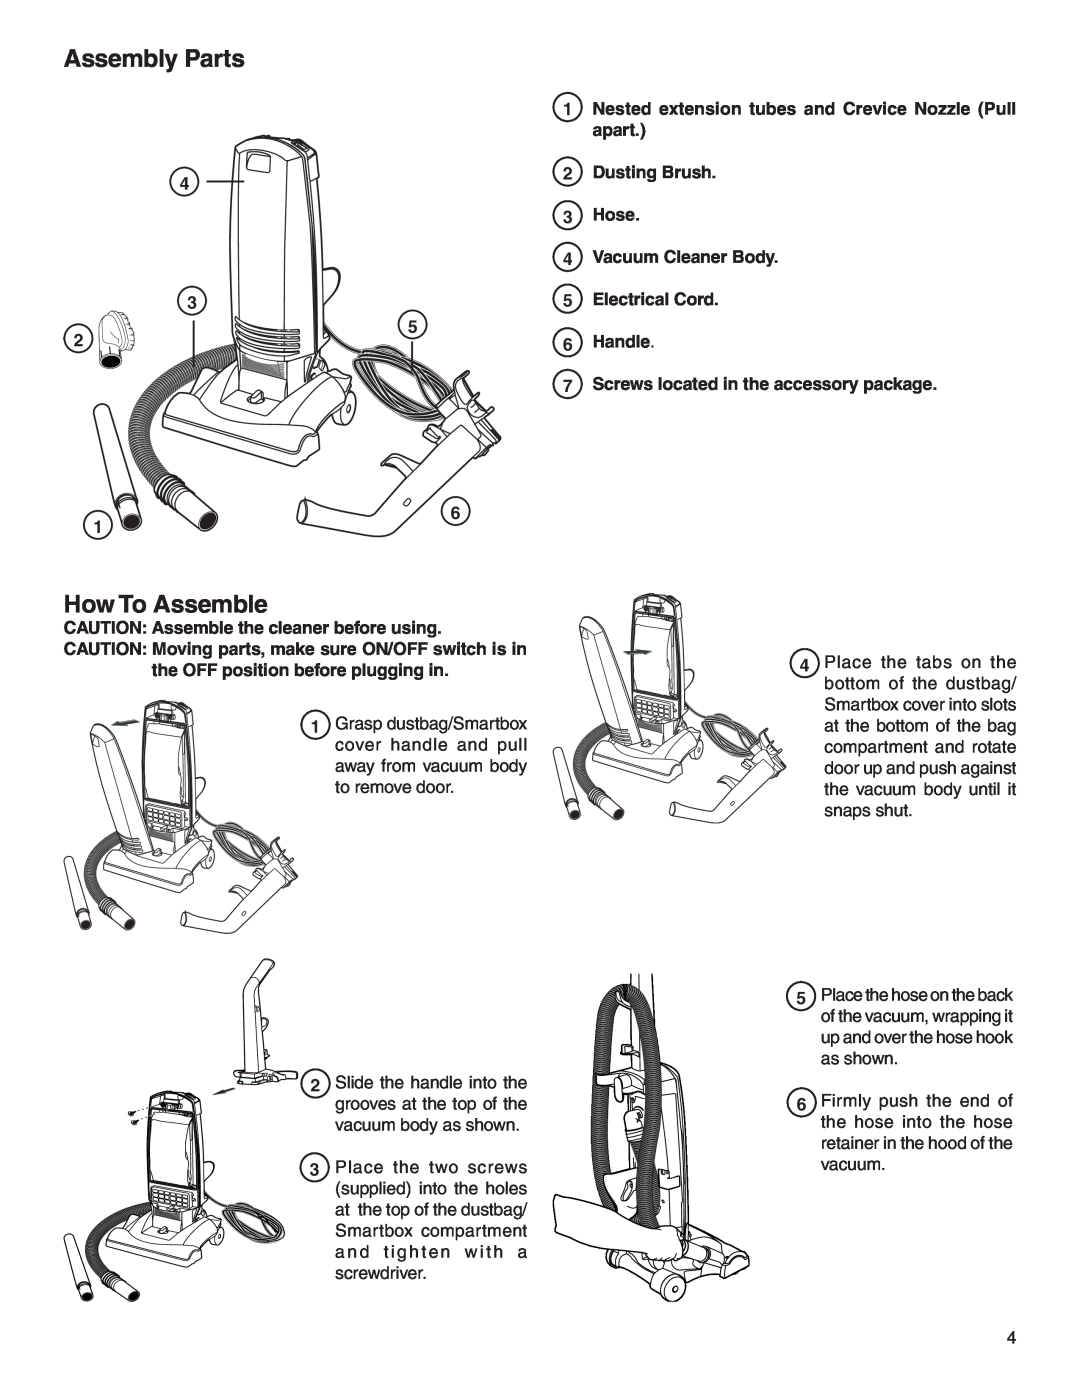 Electrolux Z2900 Series manual Assembly Parts, How To Assemble 